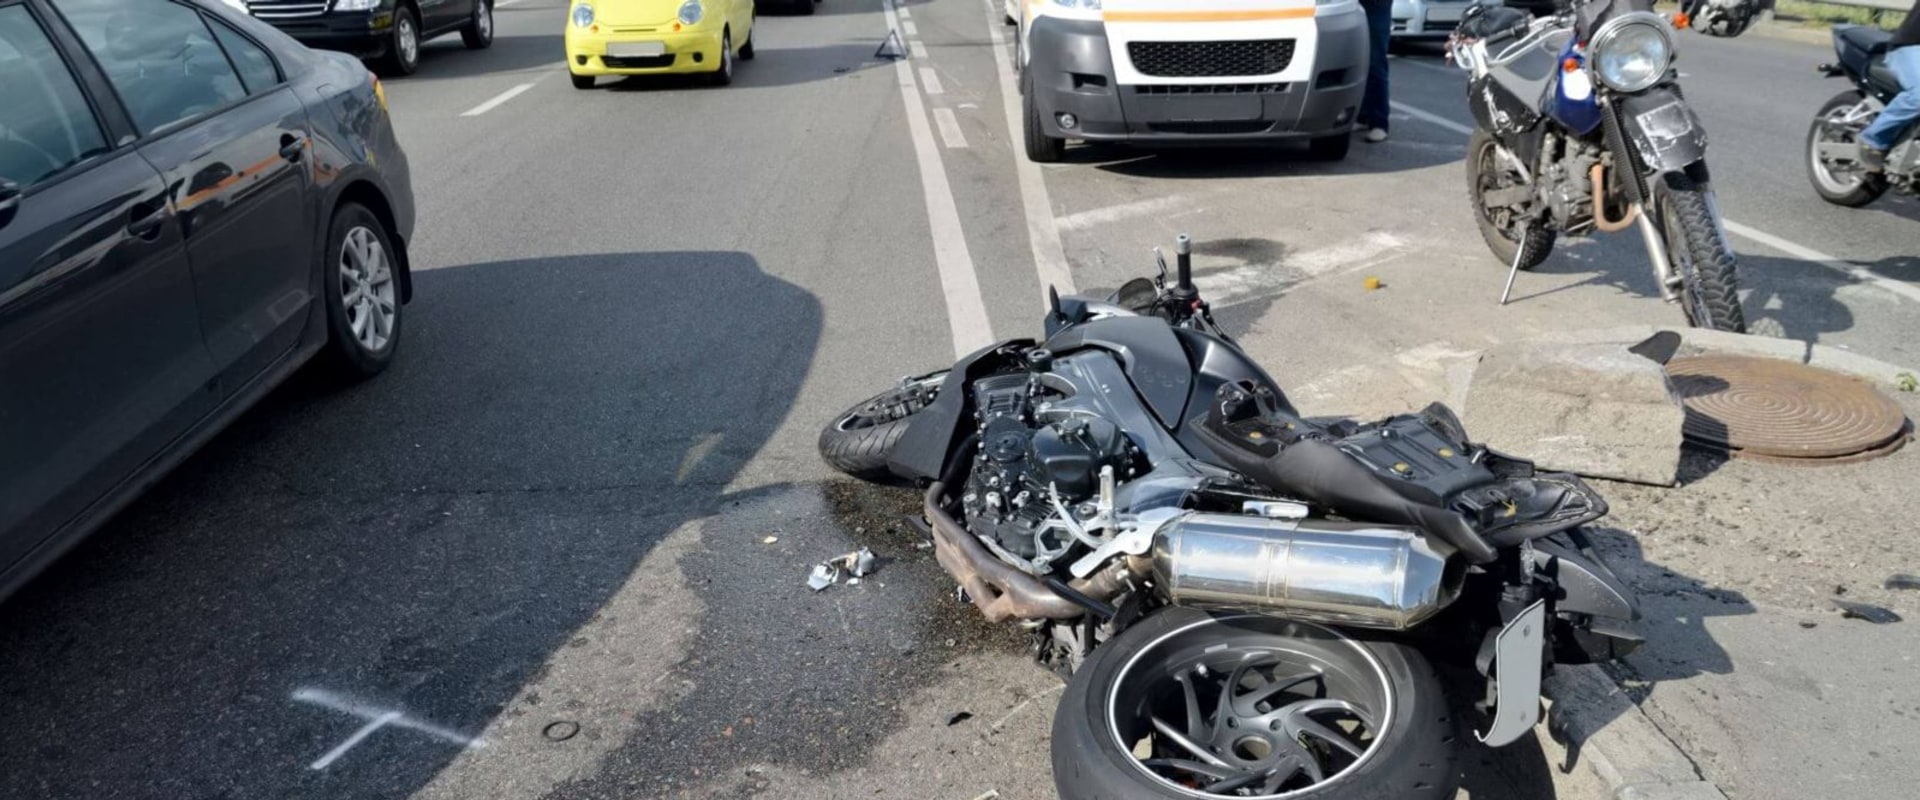 Motorcycle Accident Claims for Loss of Future Earnings